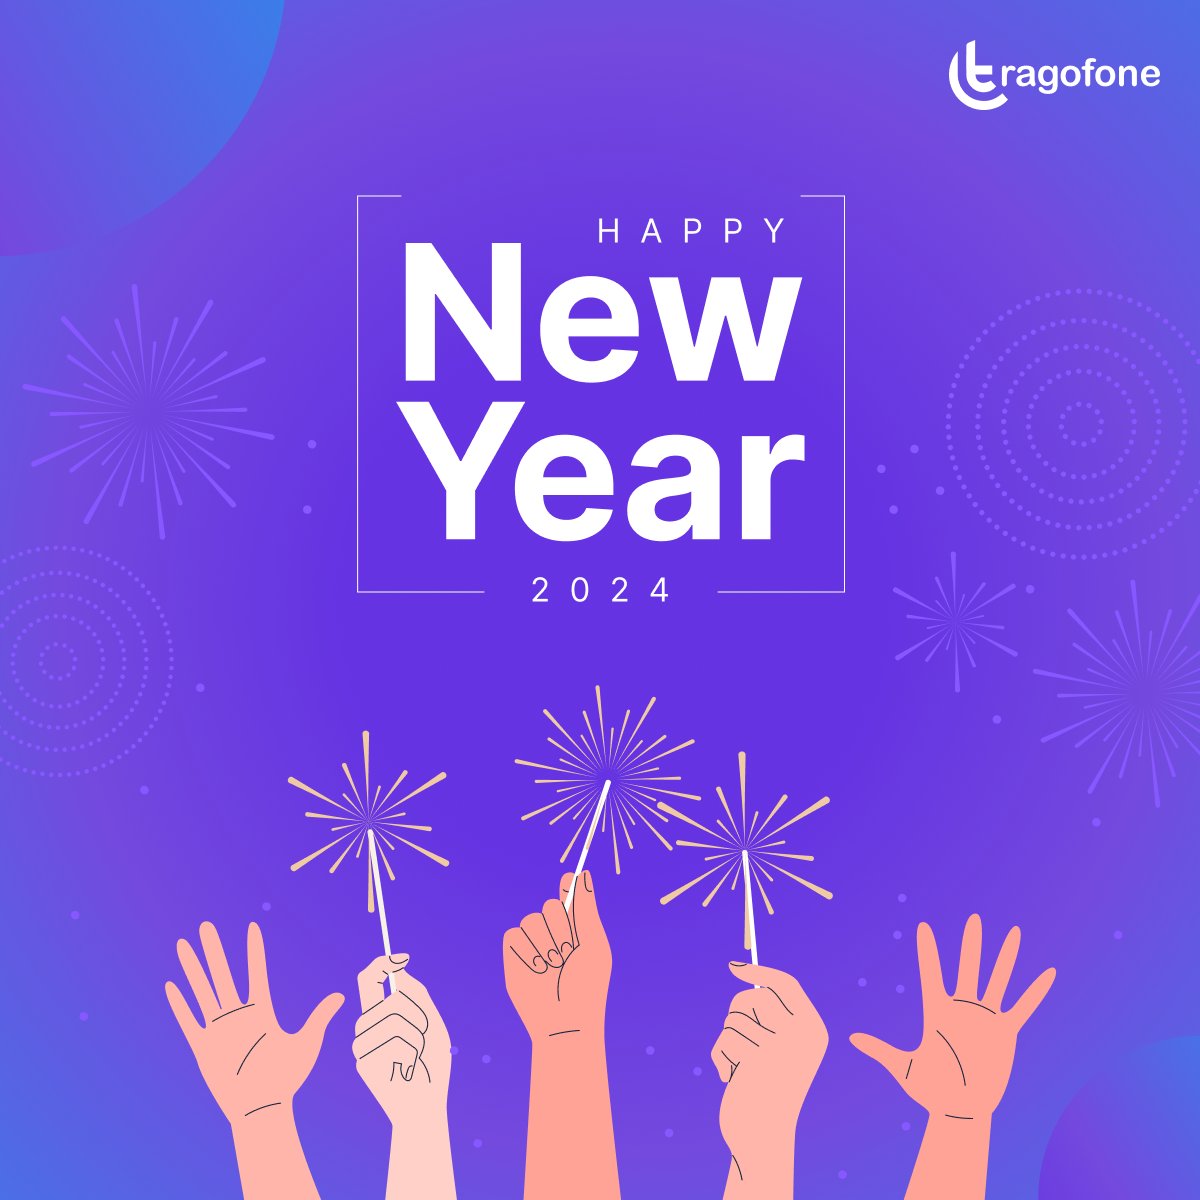 Happy New Year! May the coming year bring you joy, success, and memorable moments. - Team Tragofone! #HappyNewYear #newyeargreetings #HappyNewYear2024 #Welcome2024 #Tragofone